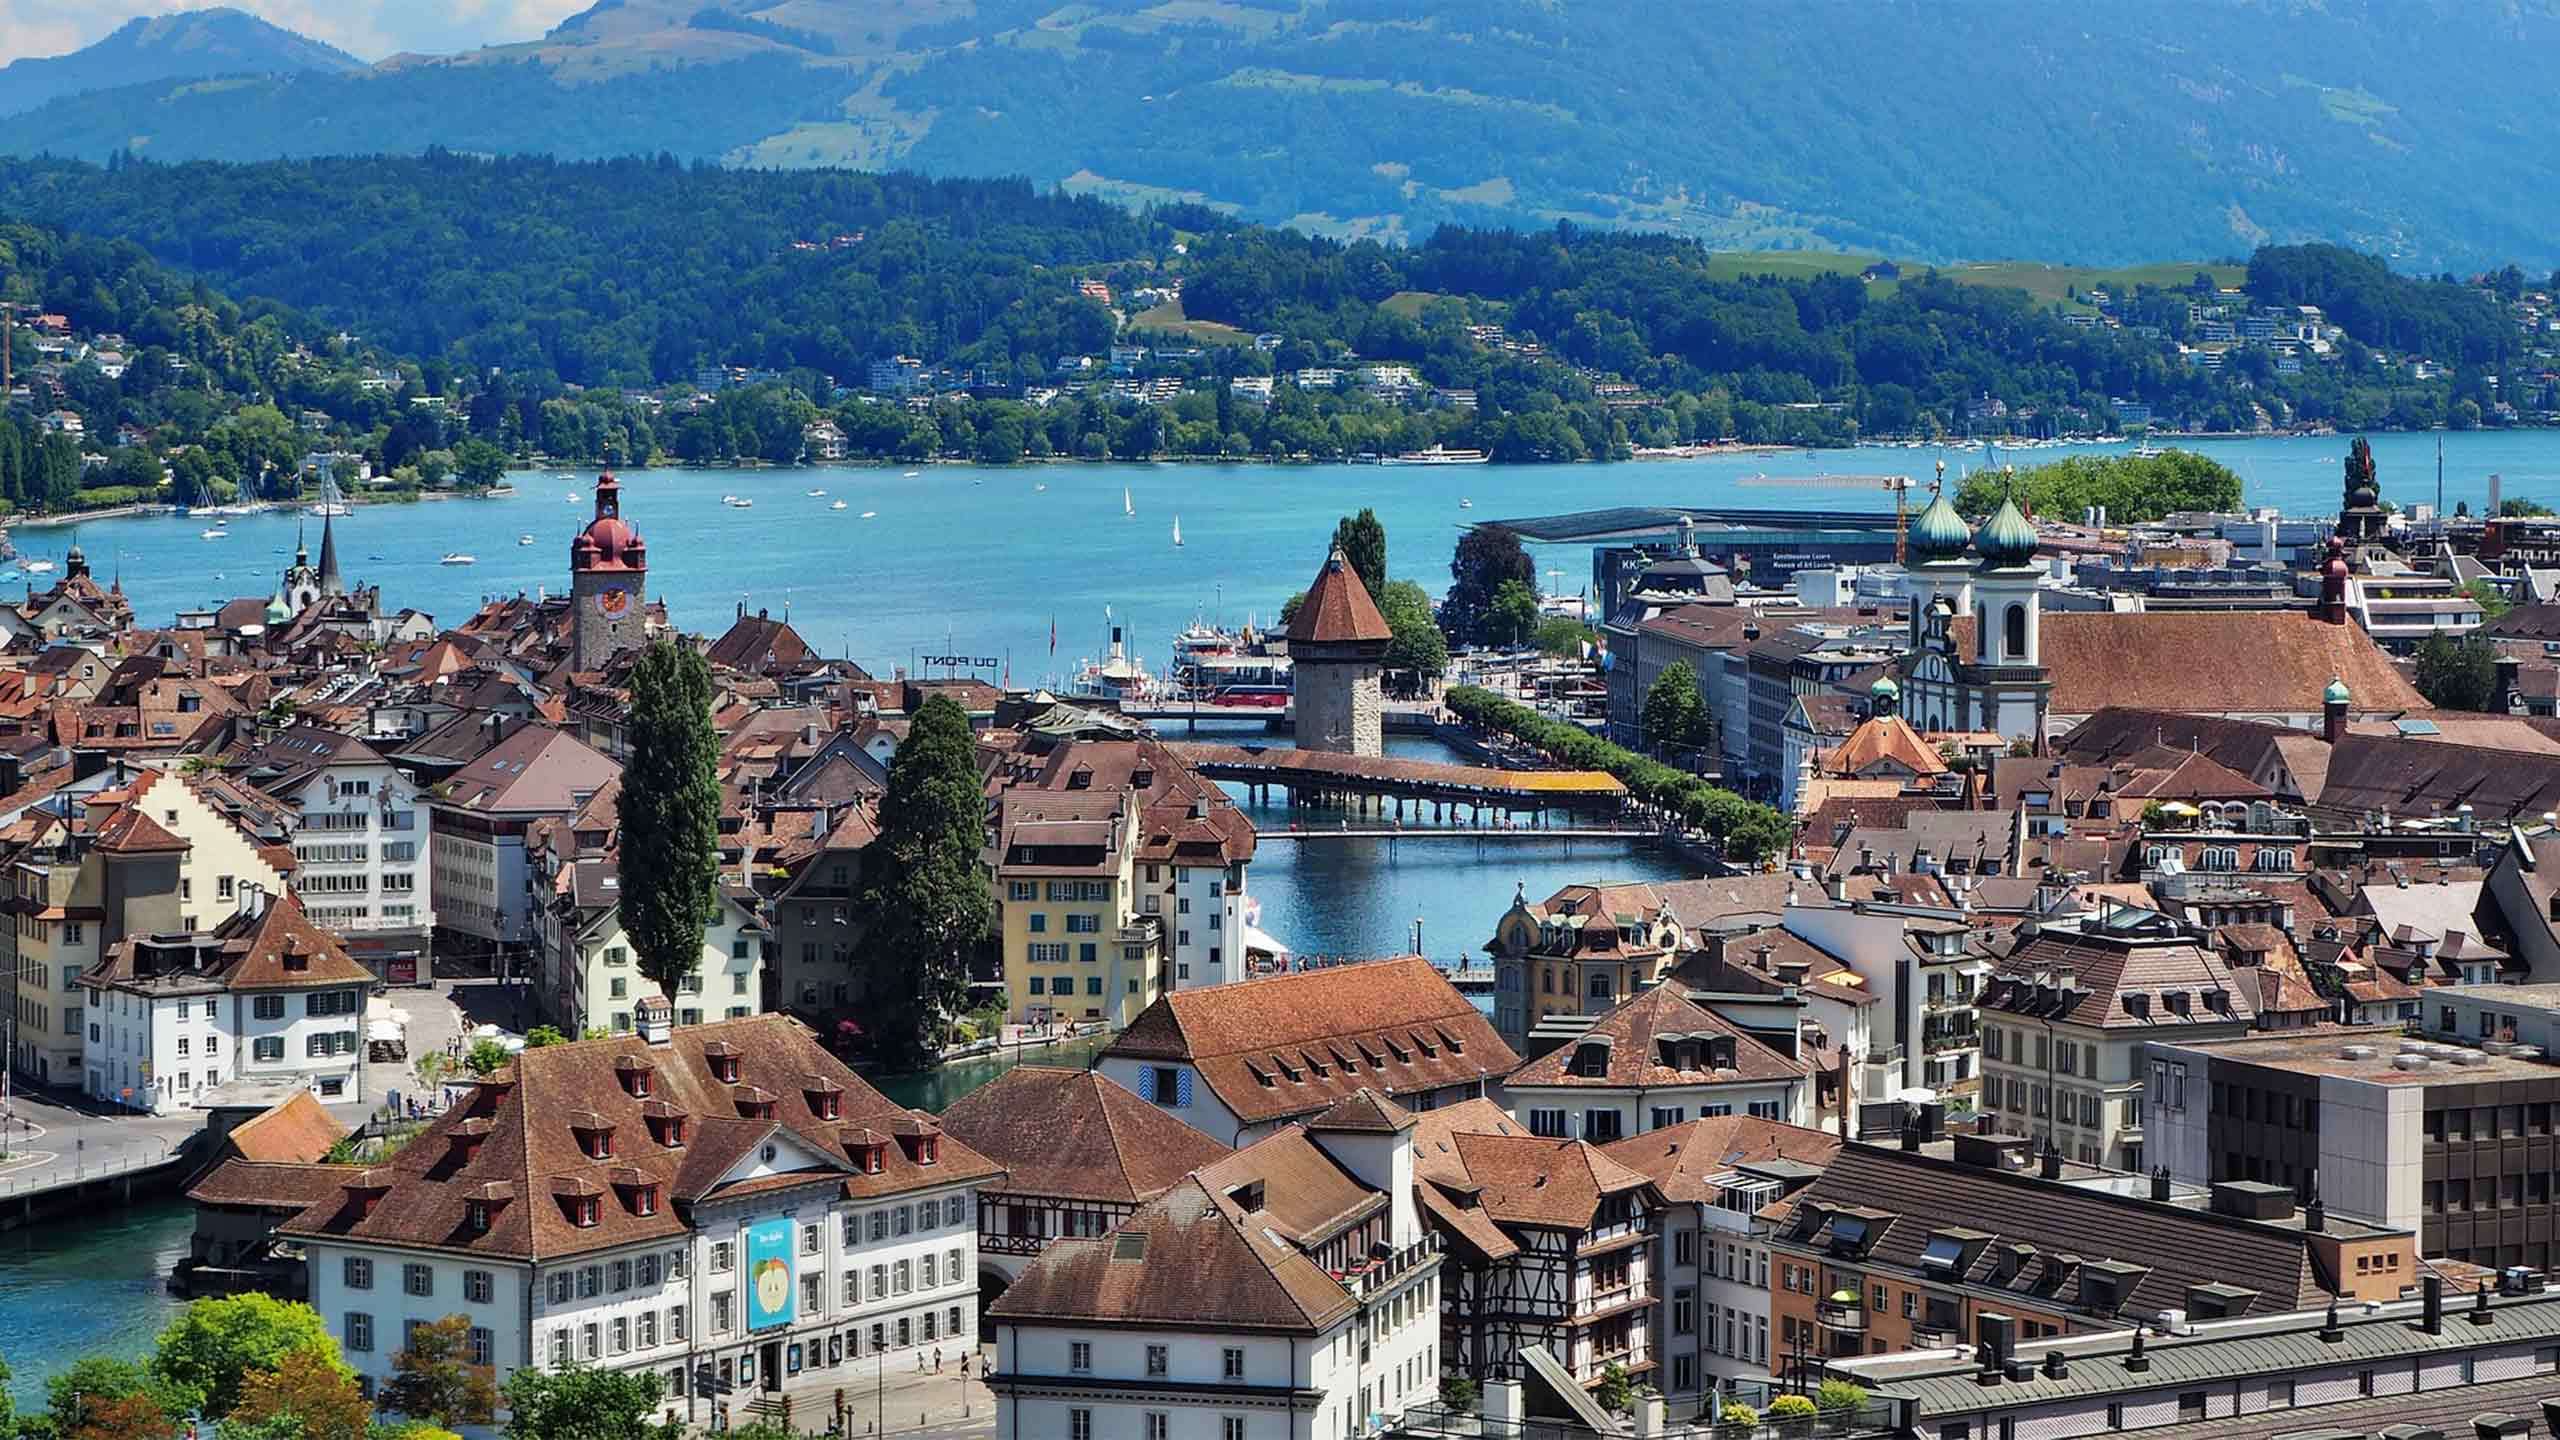 Active & Discovery Cruise On The Rhine With Lucerne (Lucerne To Amsterdam) 10D9N  